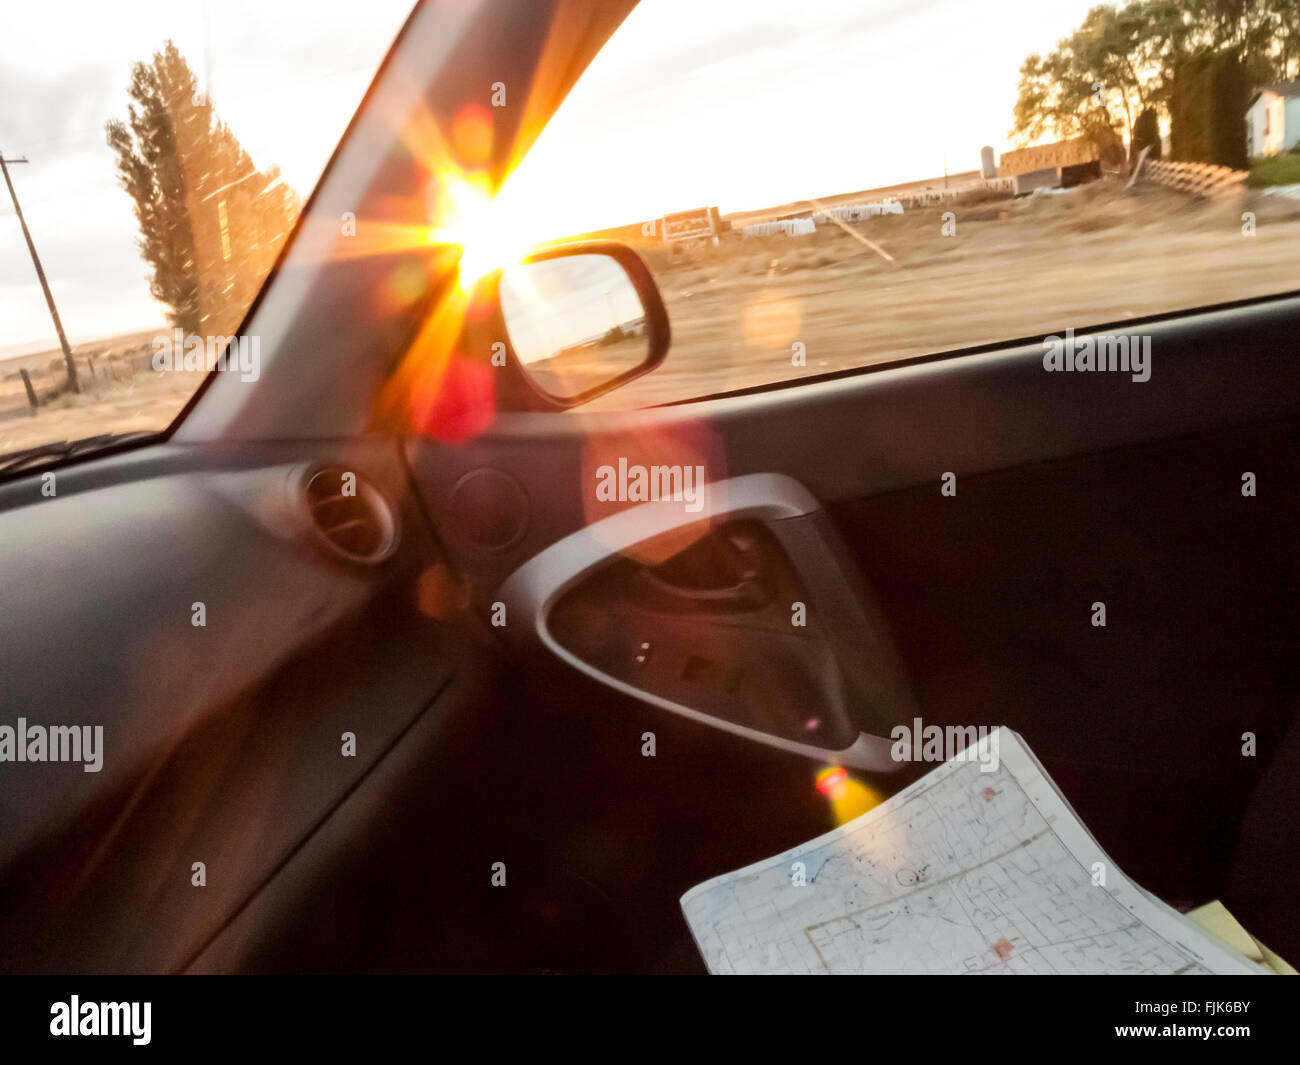 Road map on automobile passenger seat with sunset view through open window. Summer road trips exploring America by car. Stock Photo